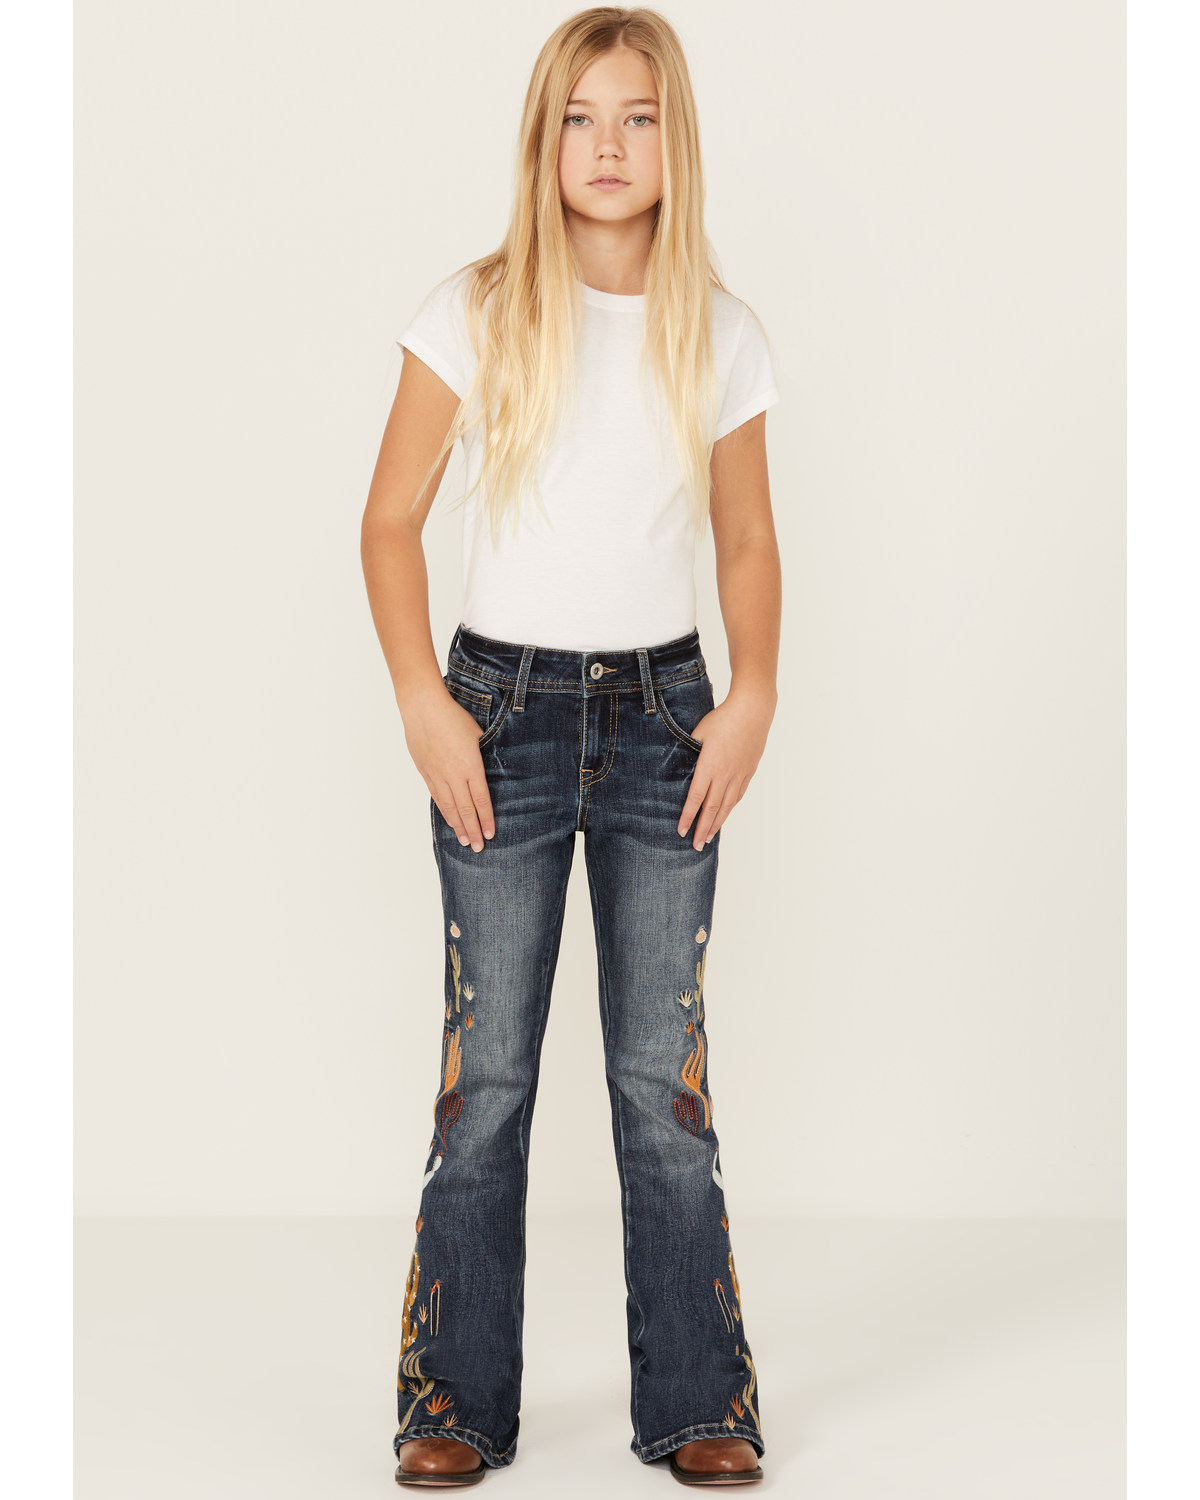 Grace LA Girls' Medium Wash Cactus Embroidered Stretch Flare Jeans